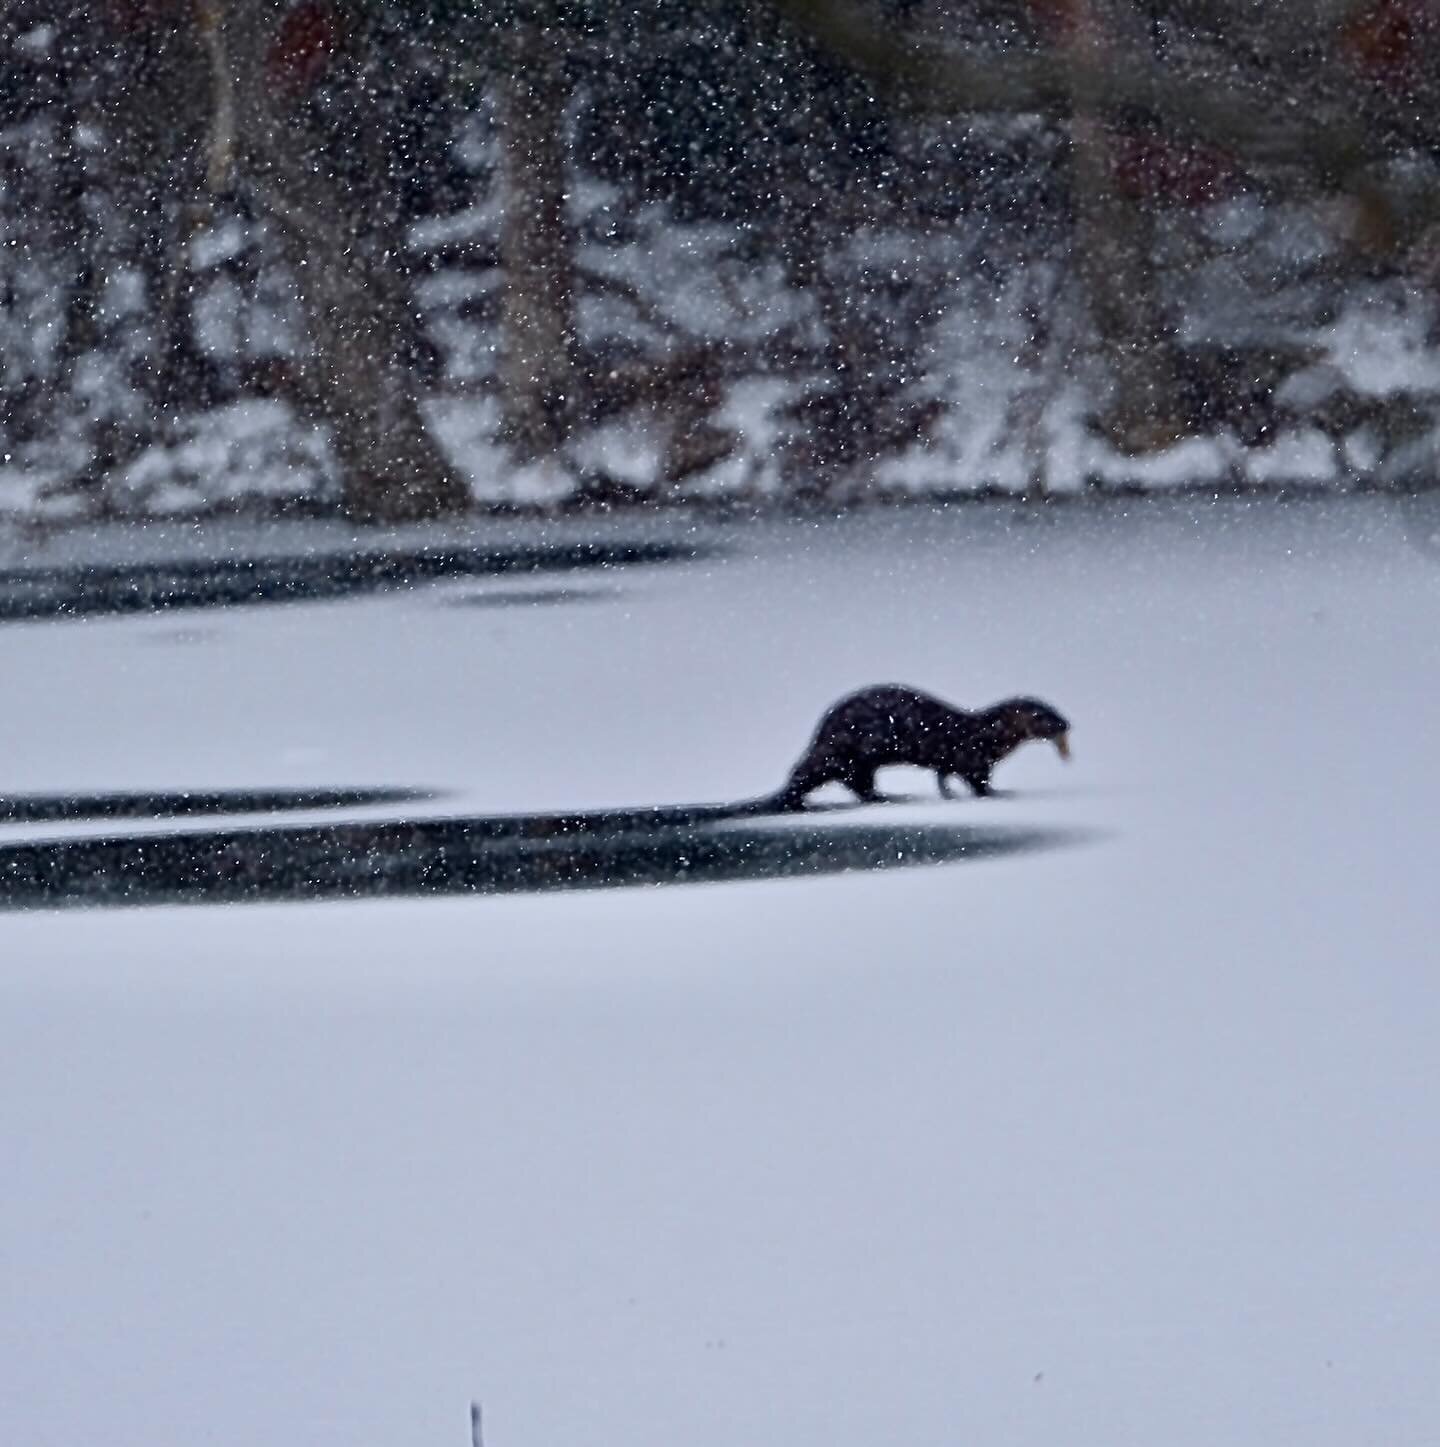 Although I was grumbling last week about the cold snowy weather, it did allow me to notice two otters sliding and playing around on the thin ice that had formed. I'd never seen otters here at the farm before! They were so cute and very curious, comin